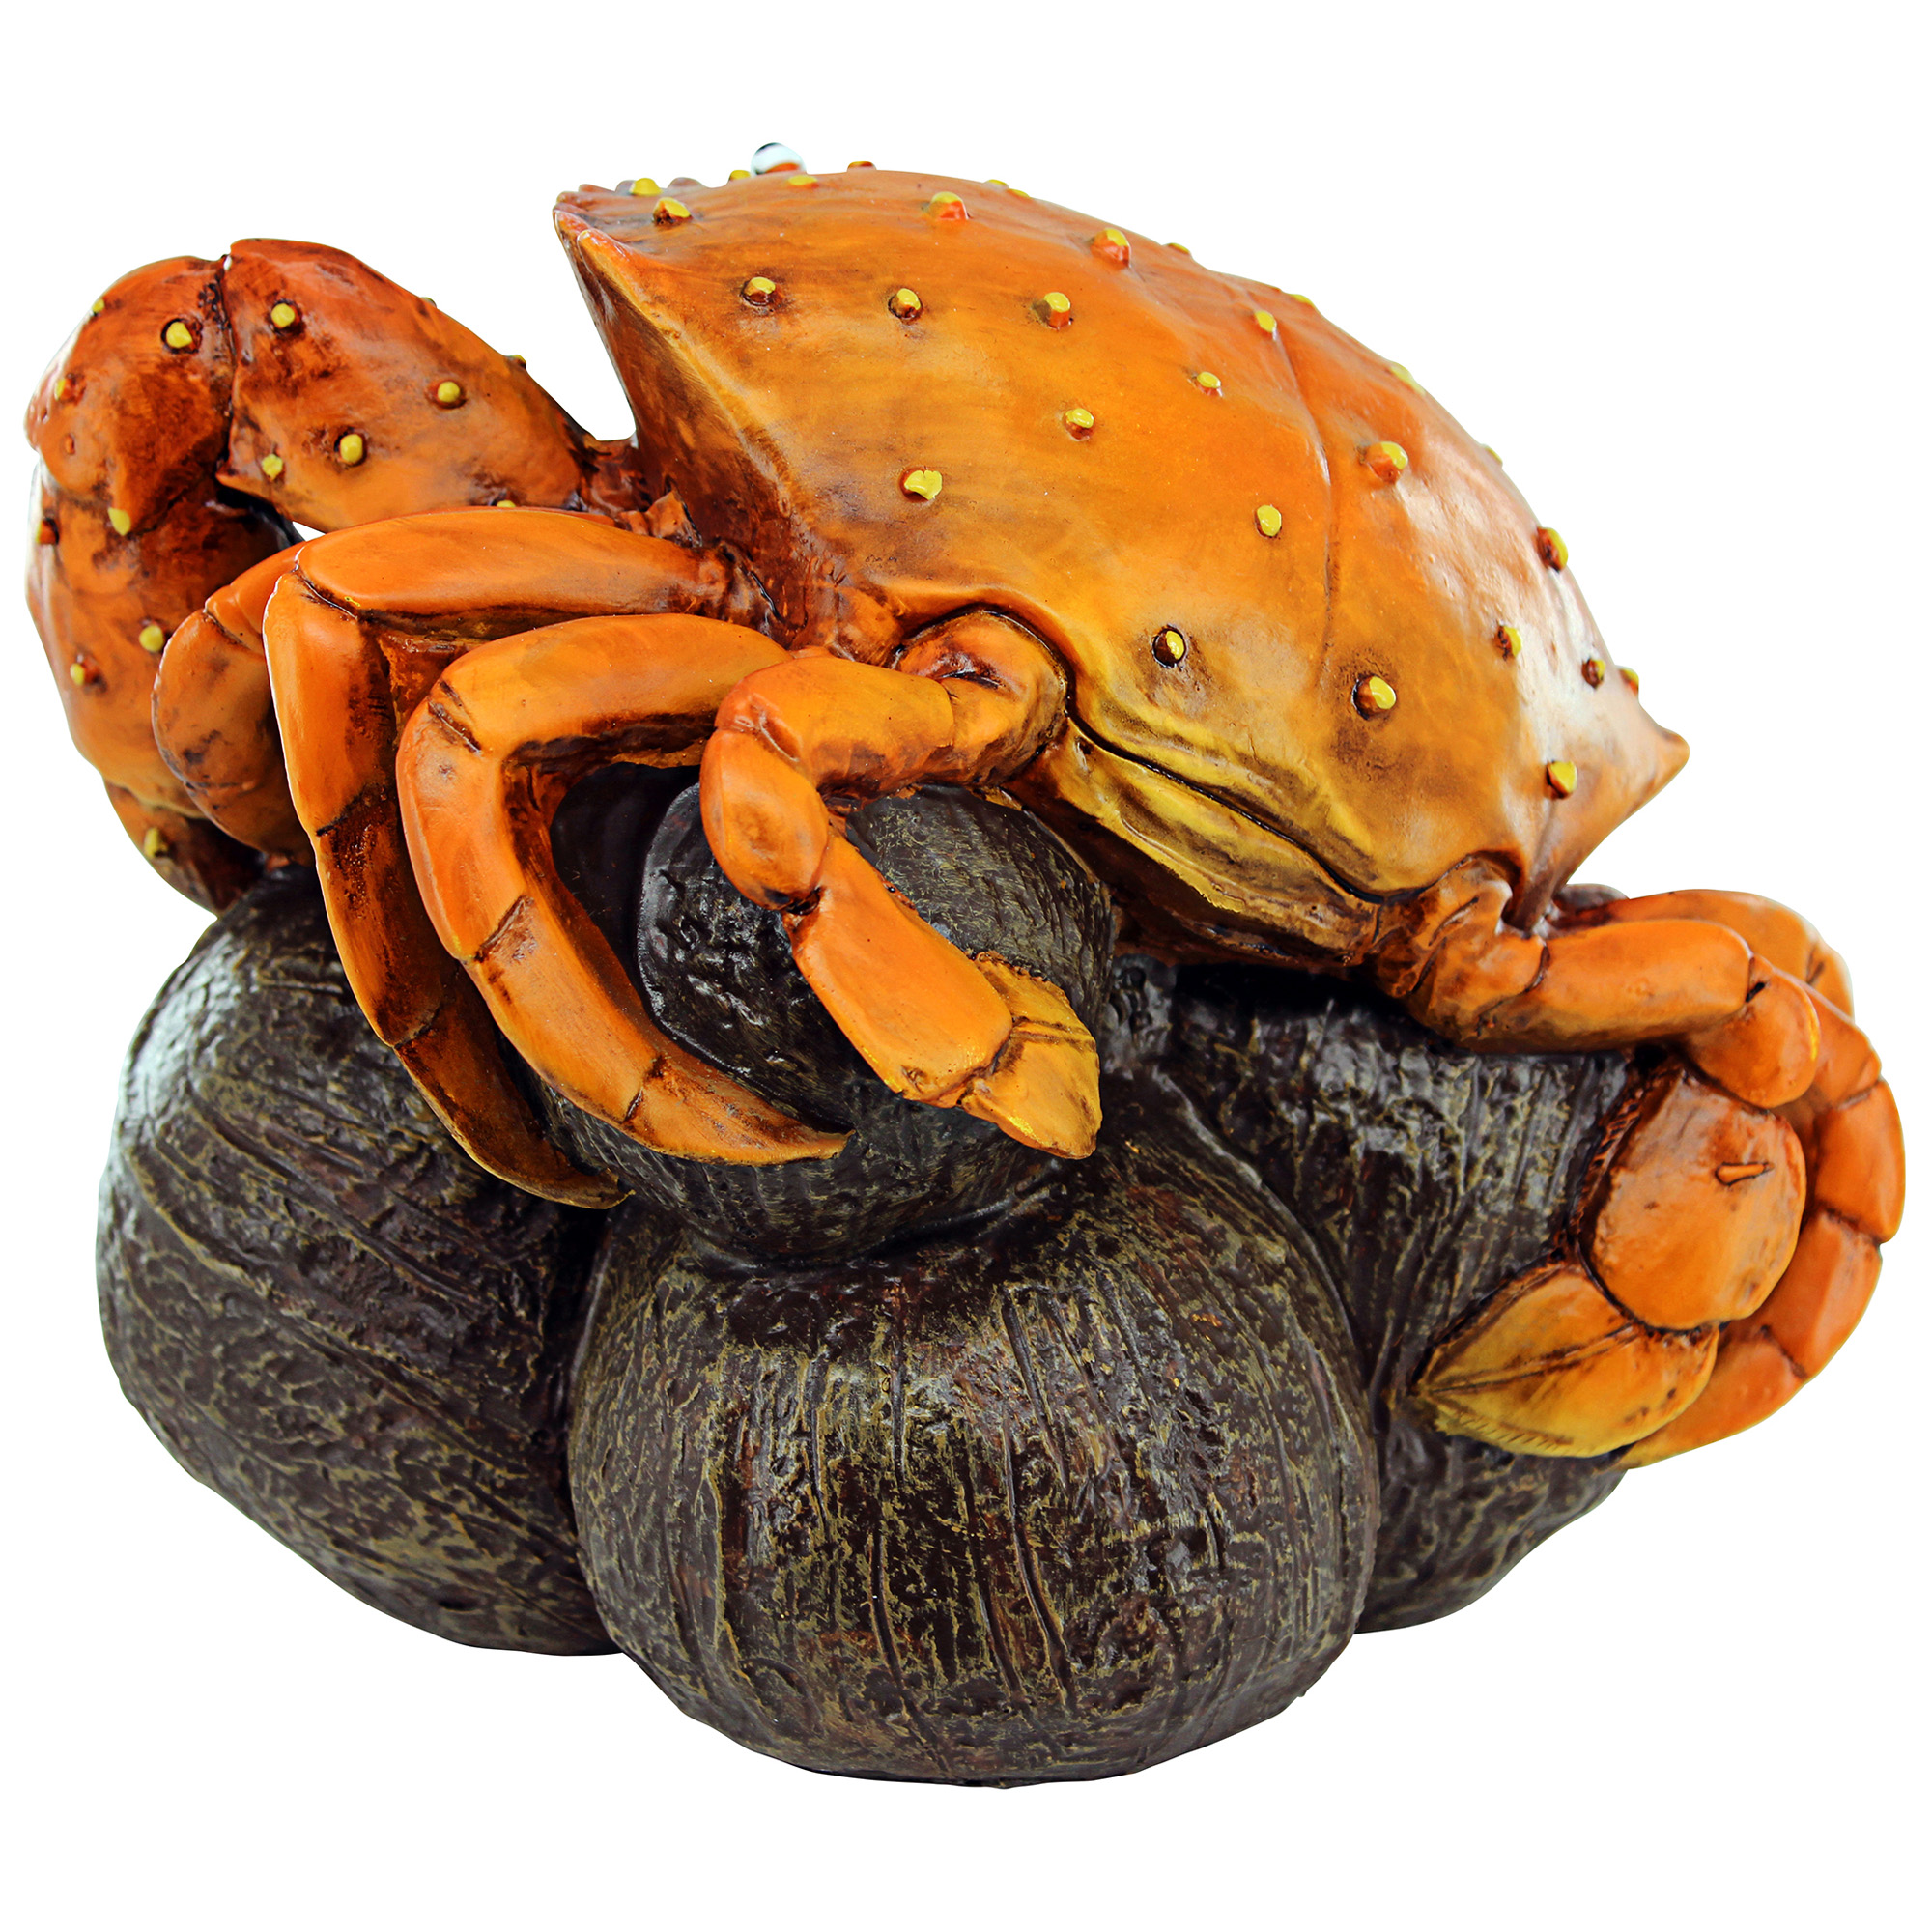 Outdoor Living and Style 9.5" Orange, Brown, and White Coastal Crab Garden Statue